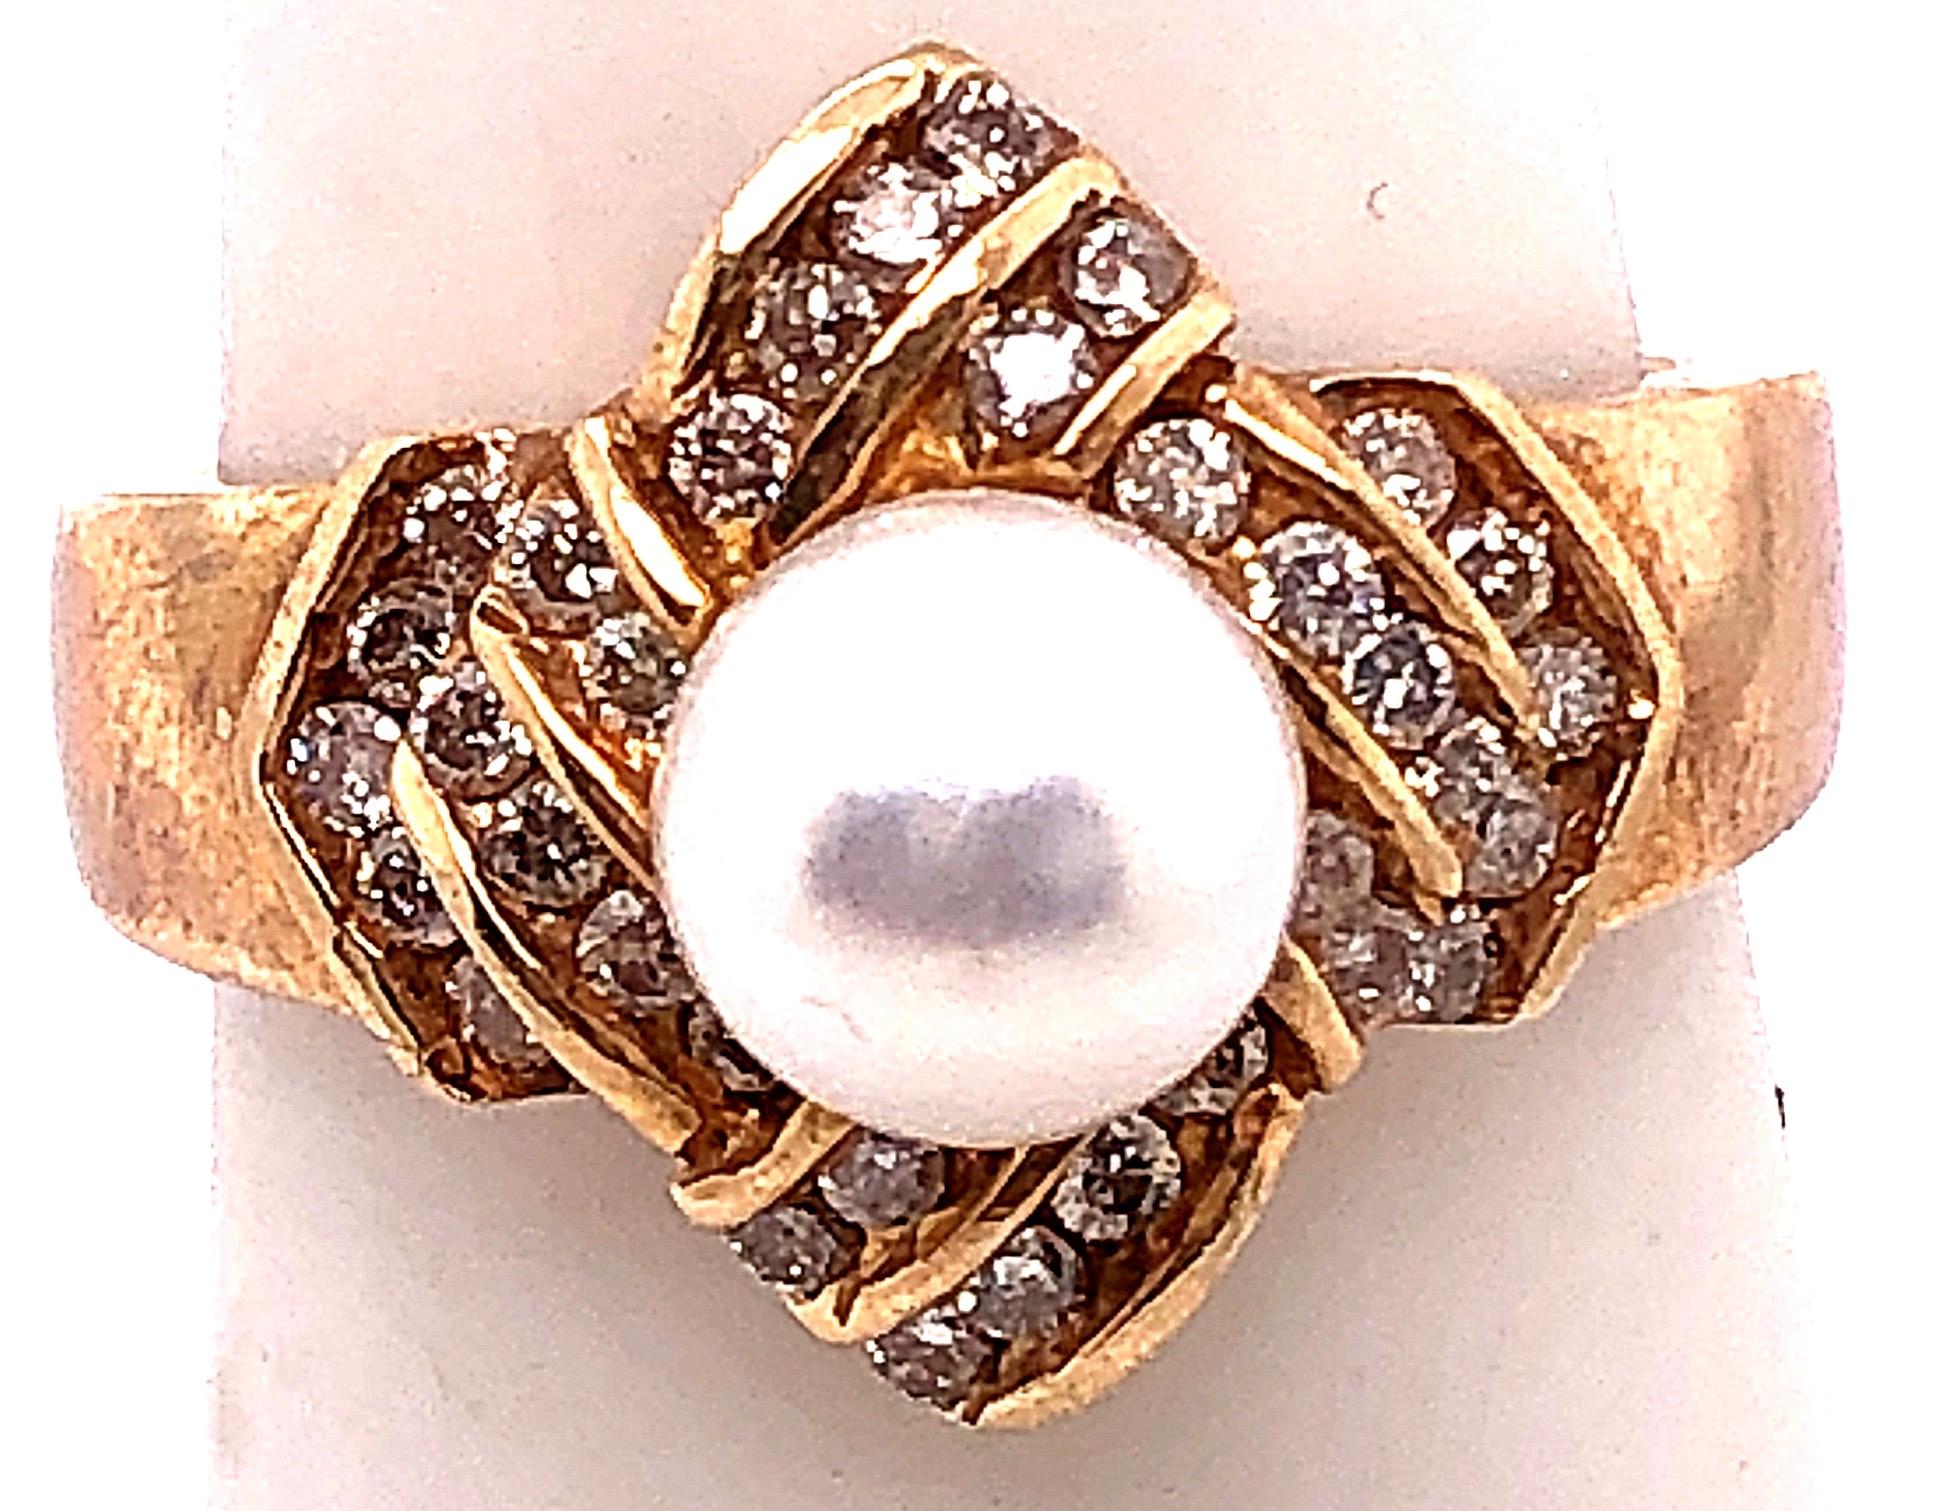 14 Karat Yellow Gold Pearl Solitaire With Diamond Accents Ring
50 piece of round diamonds with 1.00 total diamond weight.
7.00 by 7.00 mm Round Pearl.
Size 7
5.40 grams total weight.
height: 20 mm
width: 20 mm